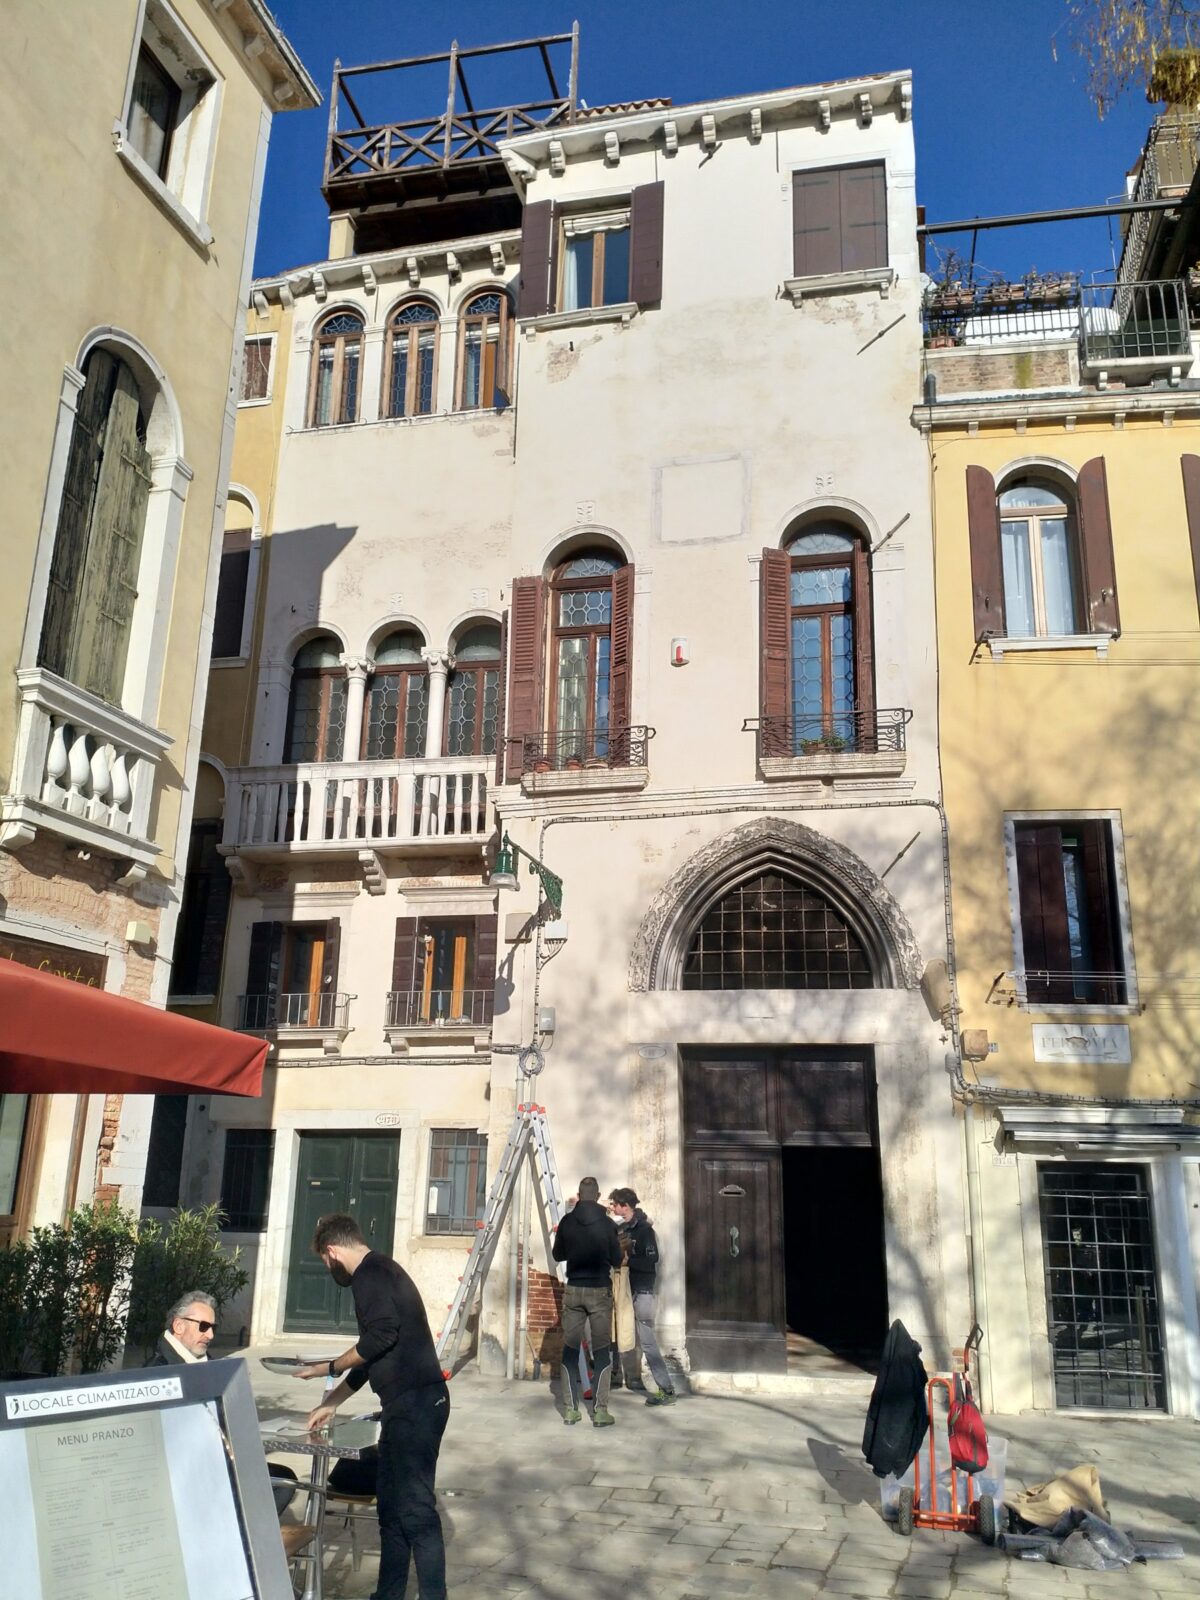 One of the palaces in Venice